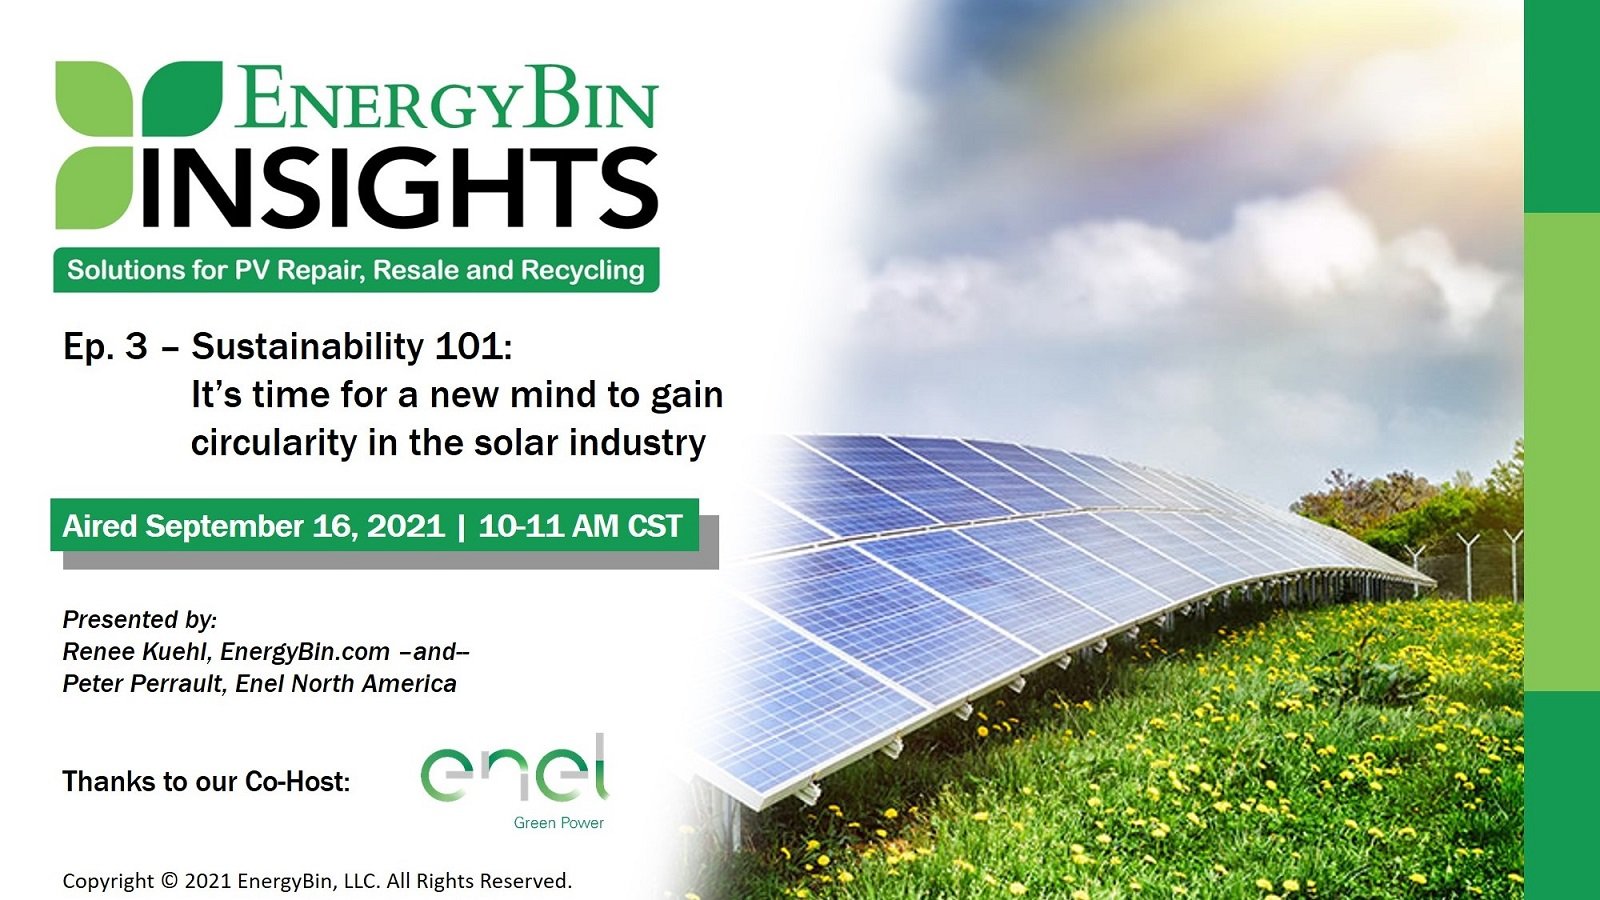 EB Insights Ep. 3 Webinar - Sustainability in the solar industry